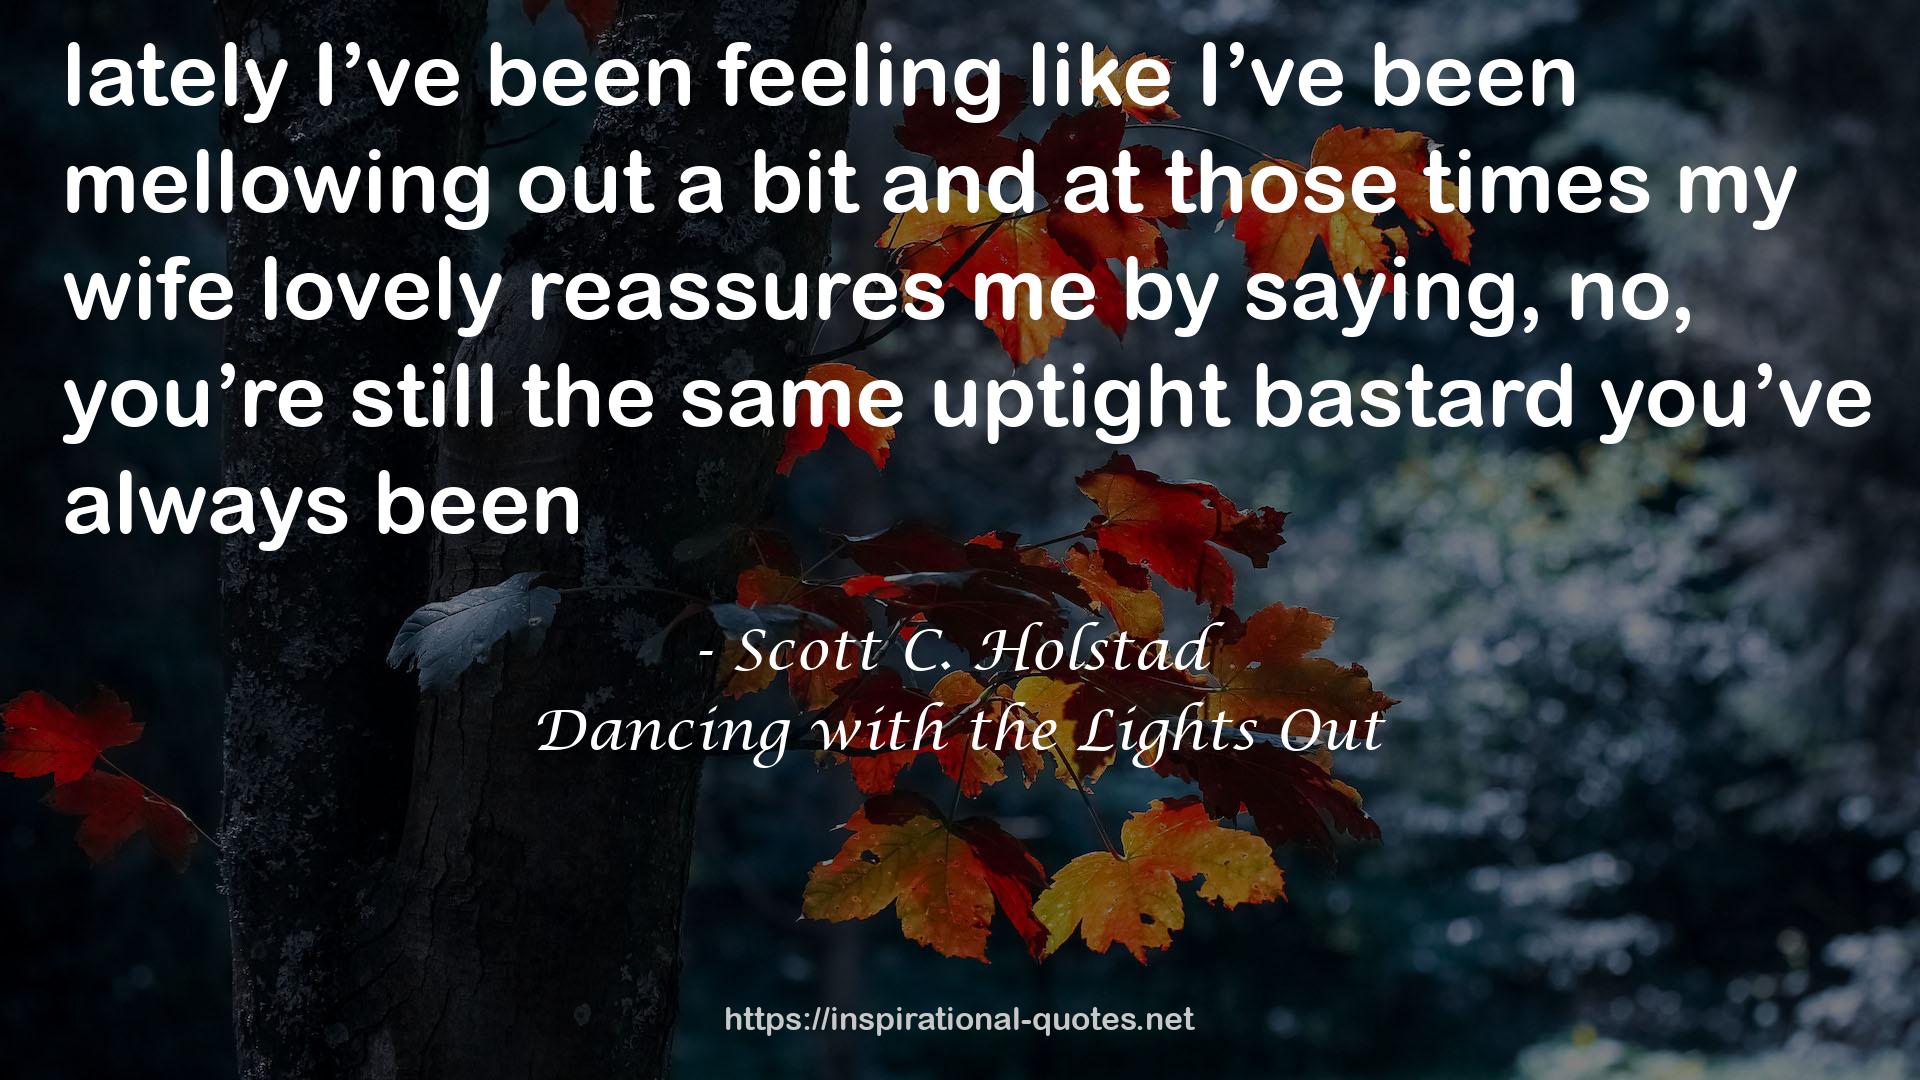 Dancing with the Lights Out QUOTES